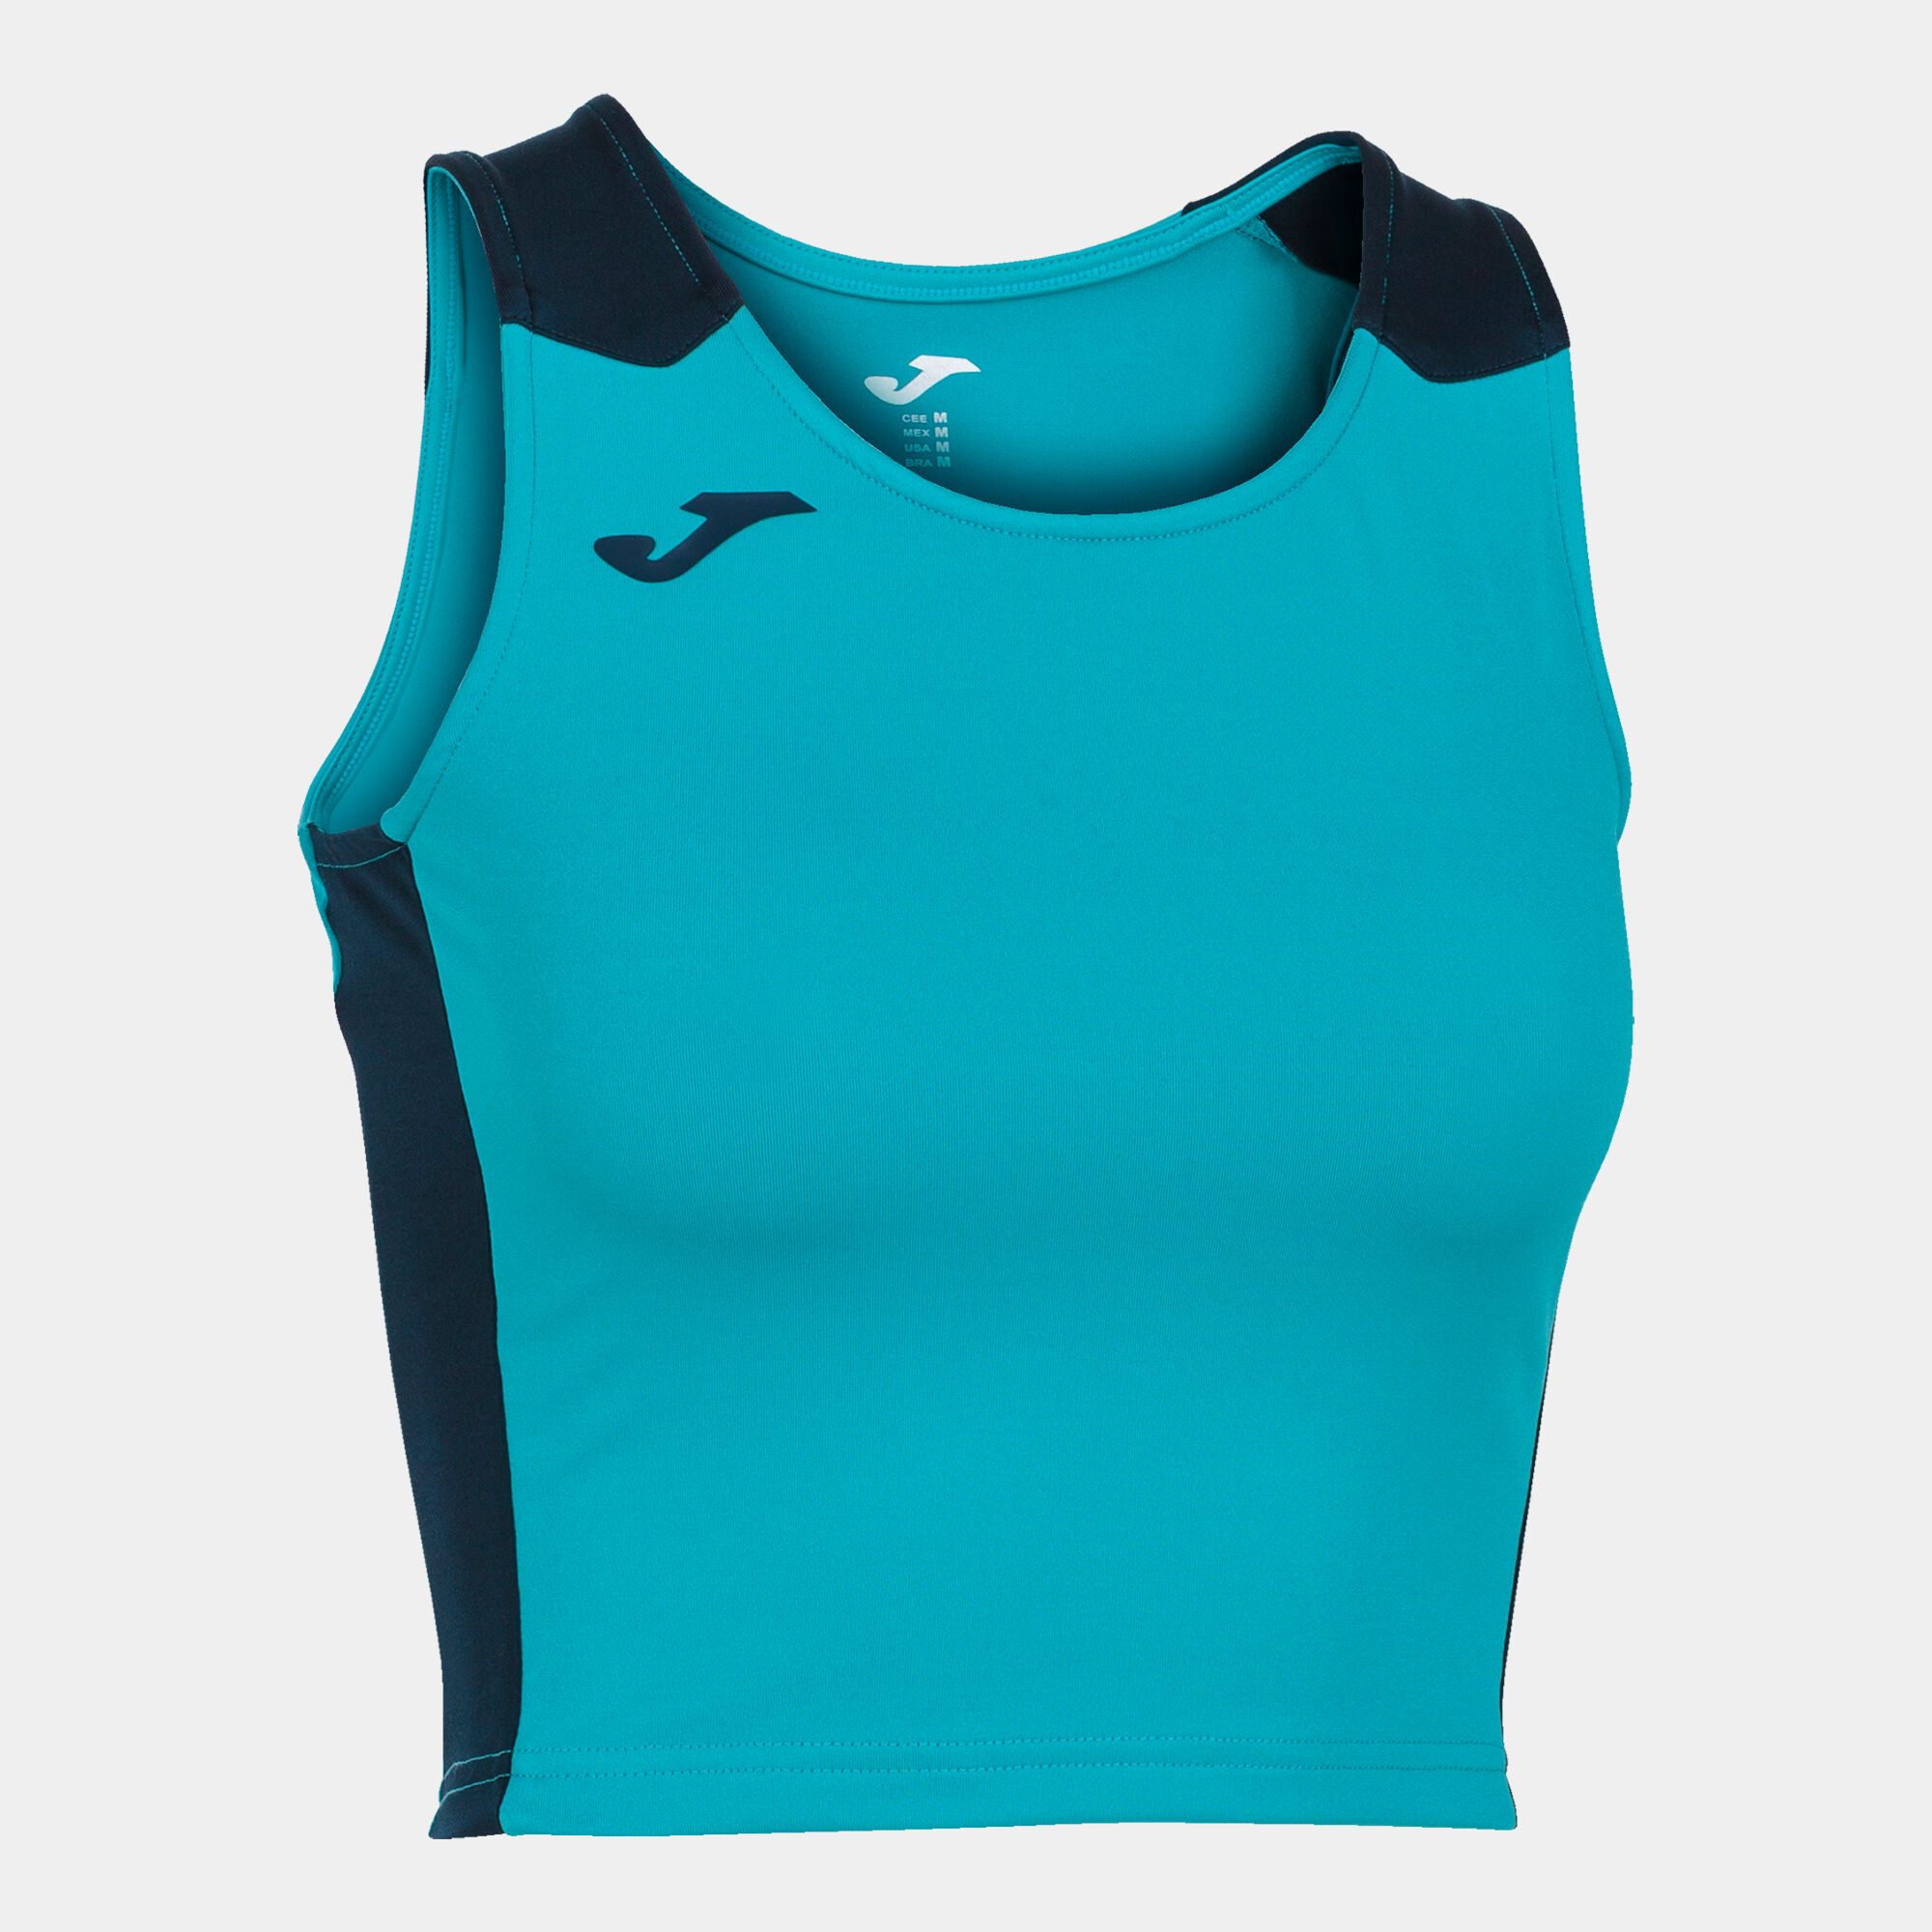 Top femme Record II turquoise fluo bleu marine